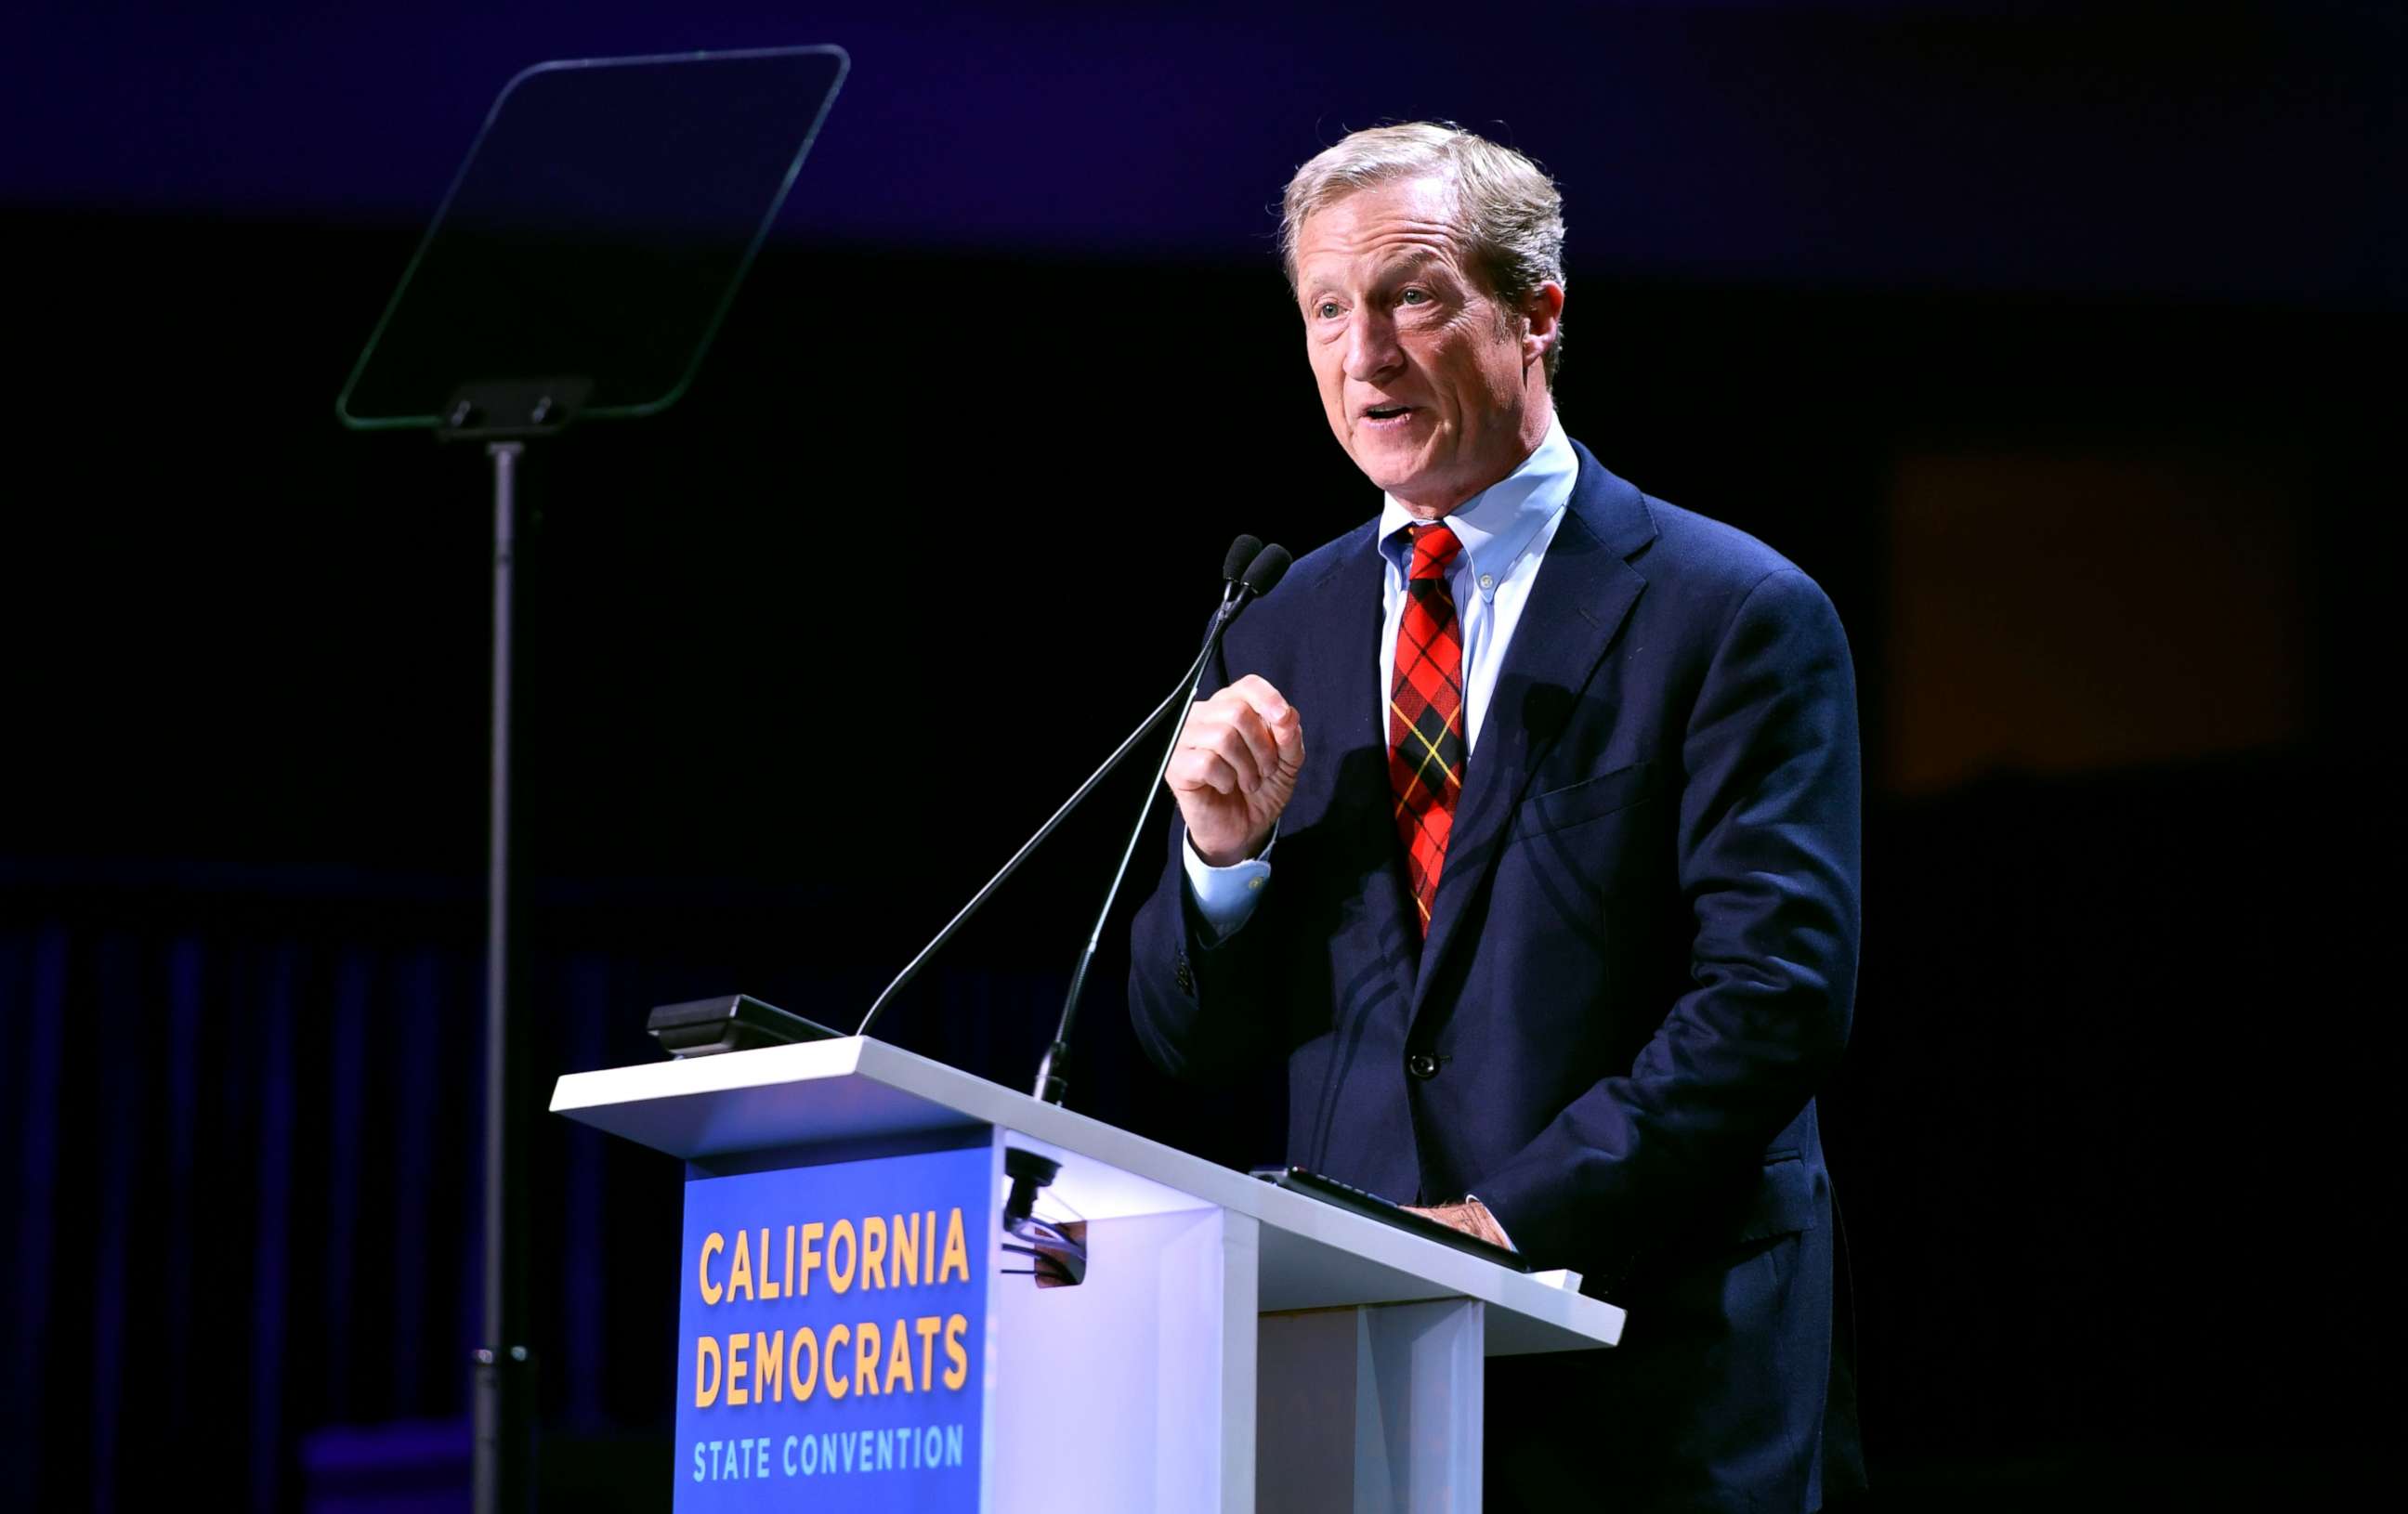 PHOTO: Tom Steyer speaks on stage during the 2019 California Democratic Party State Convention at Moscone Center in San Francisco, June 1, 2019.